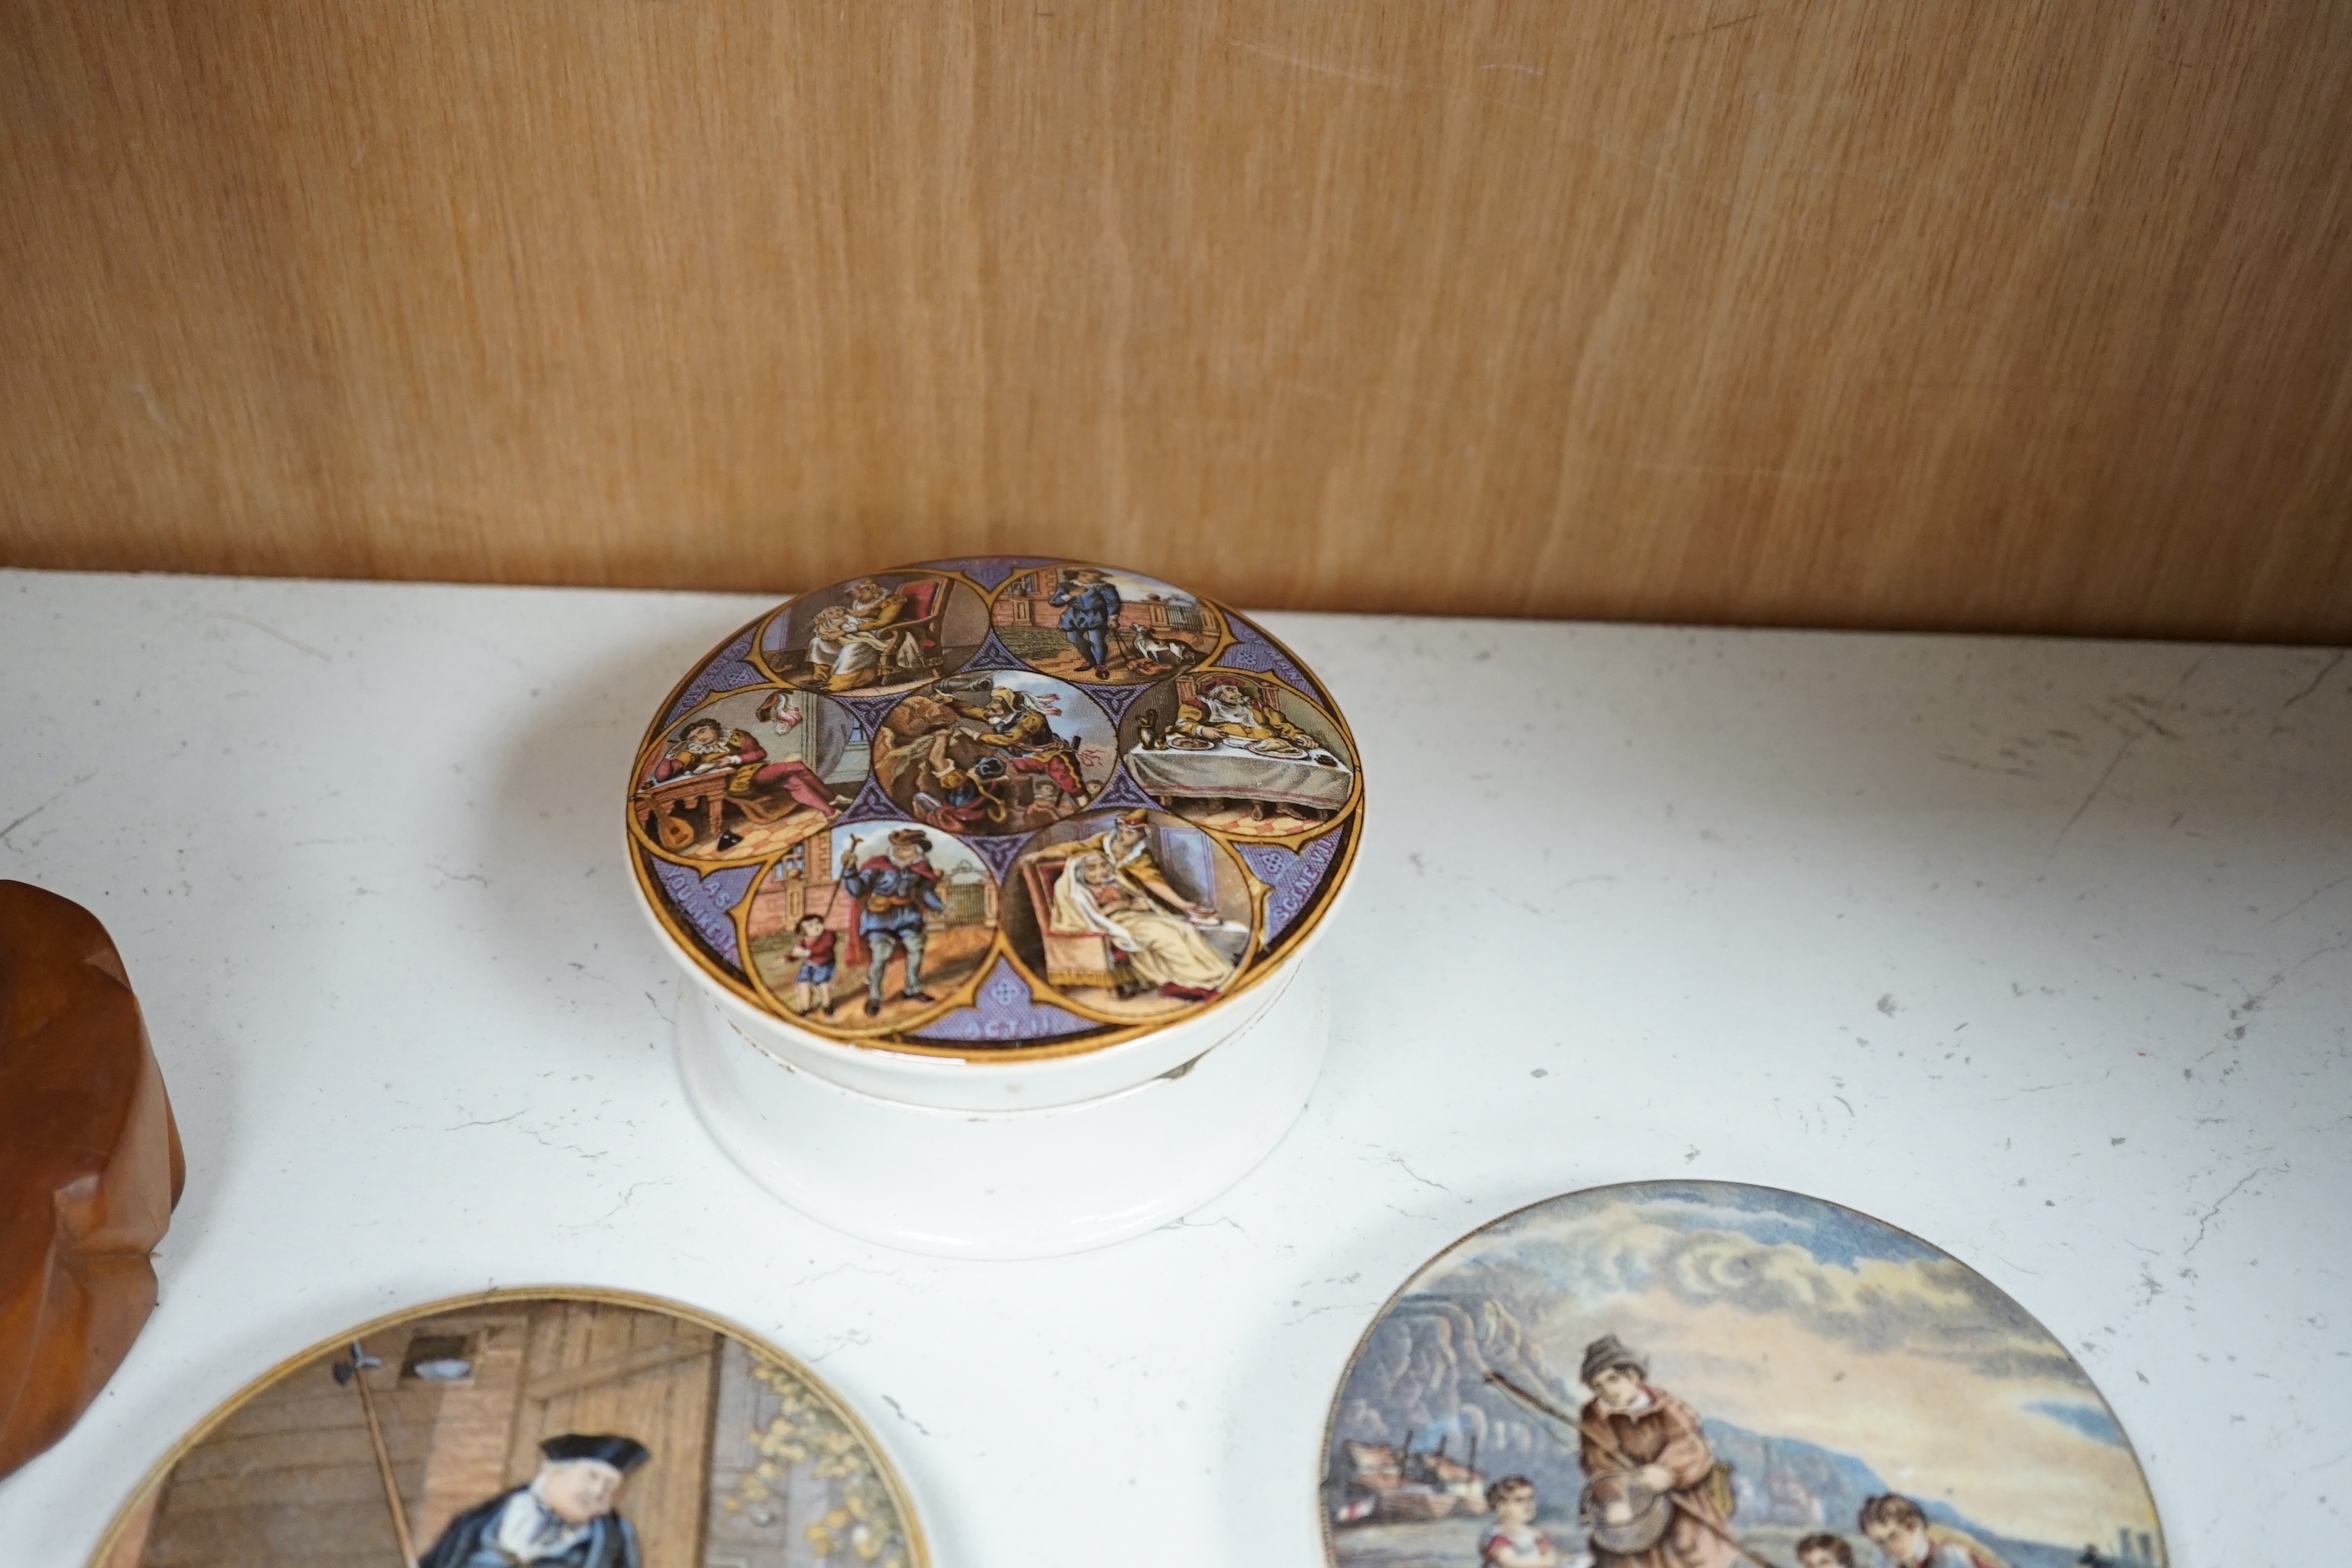 Eight Victorian ceramic Prattware pot lids, six with Shakespeare themes and a jar and cover, largest 12cm in diameter